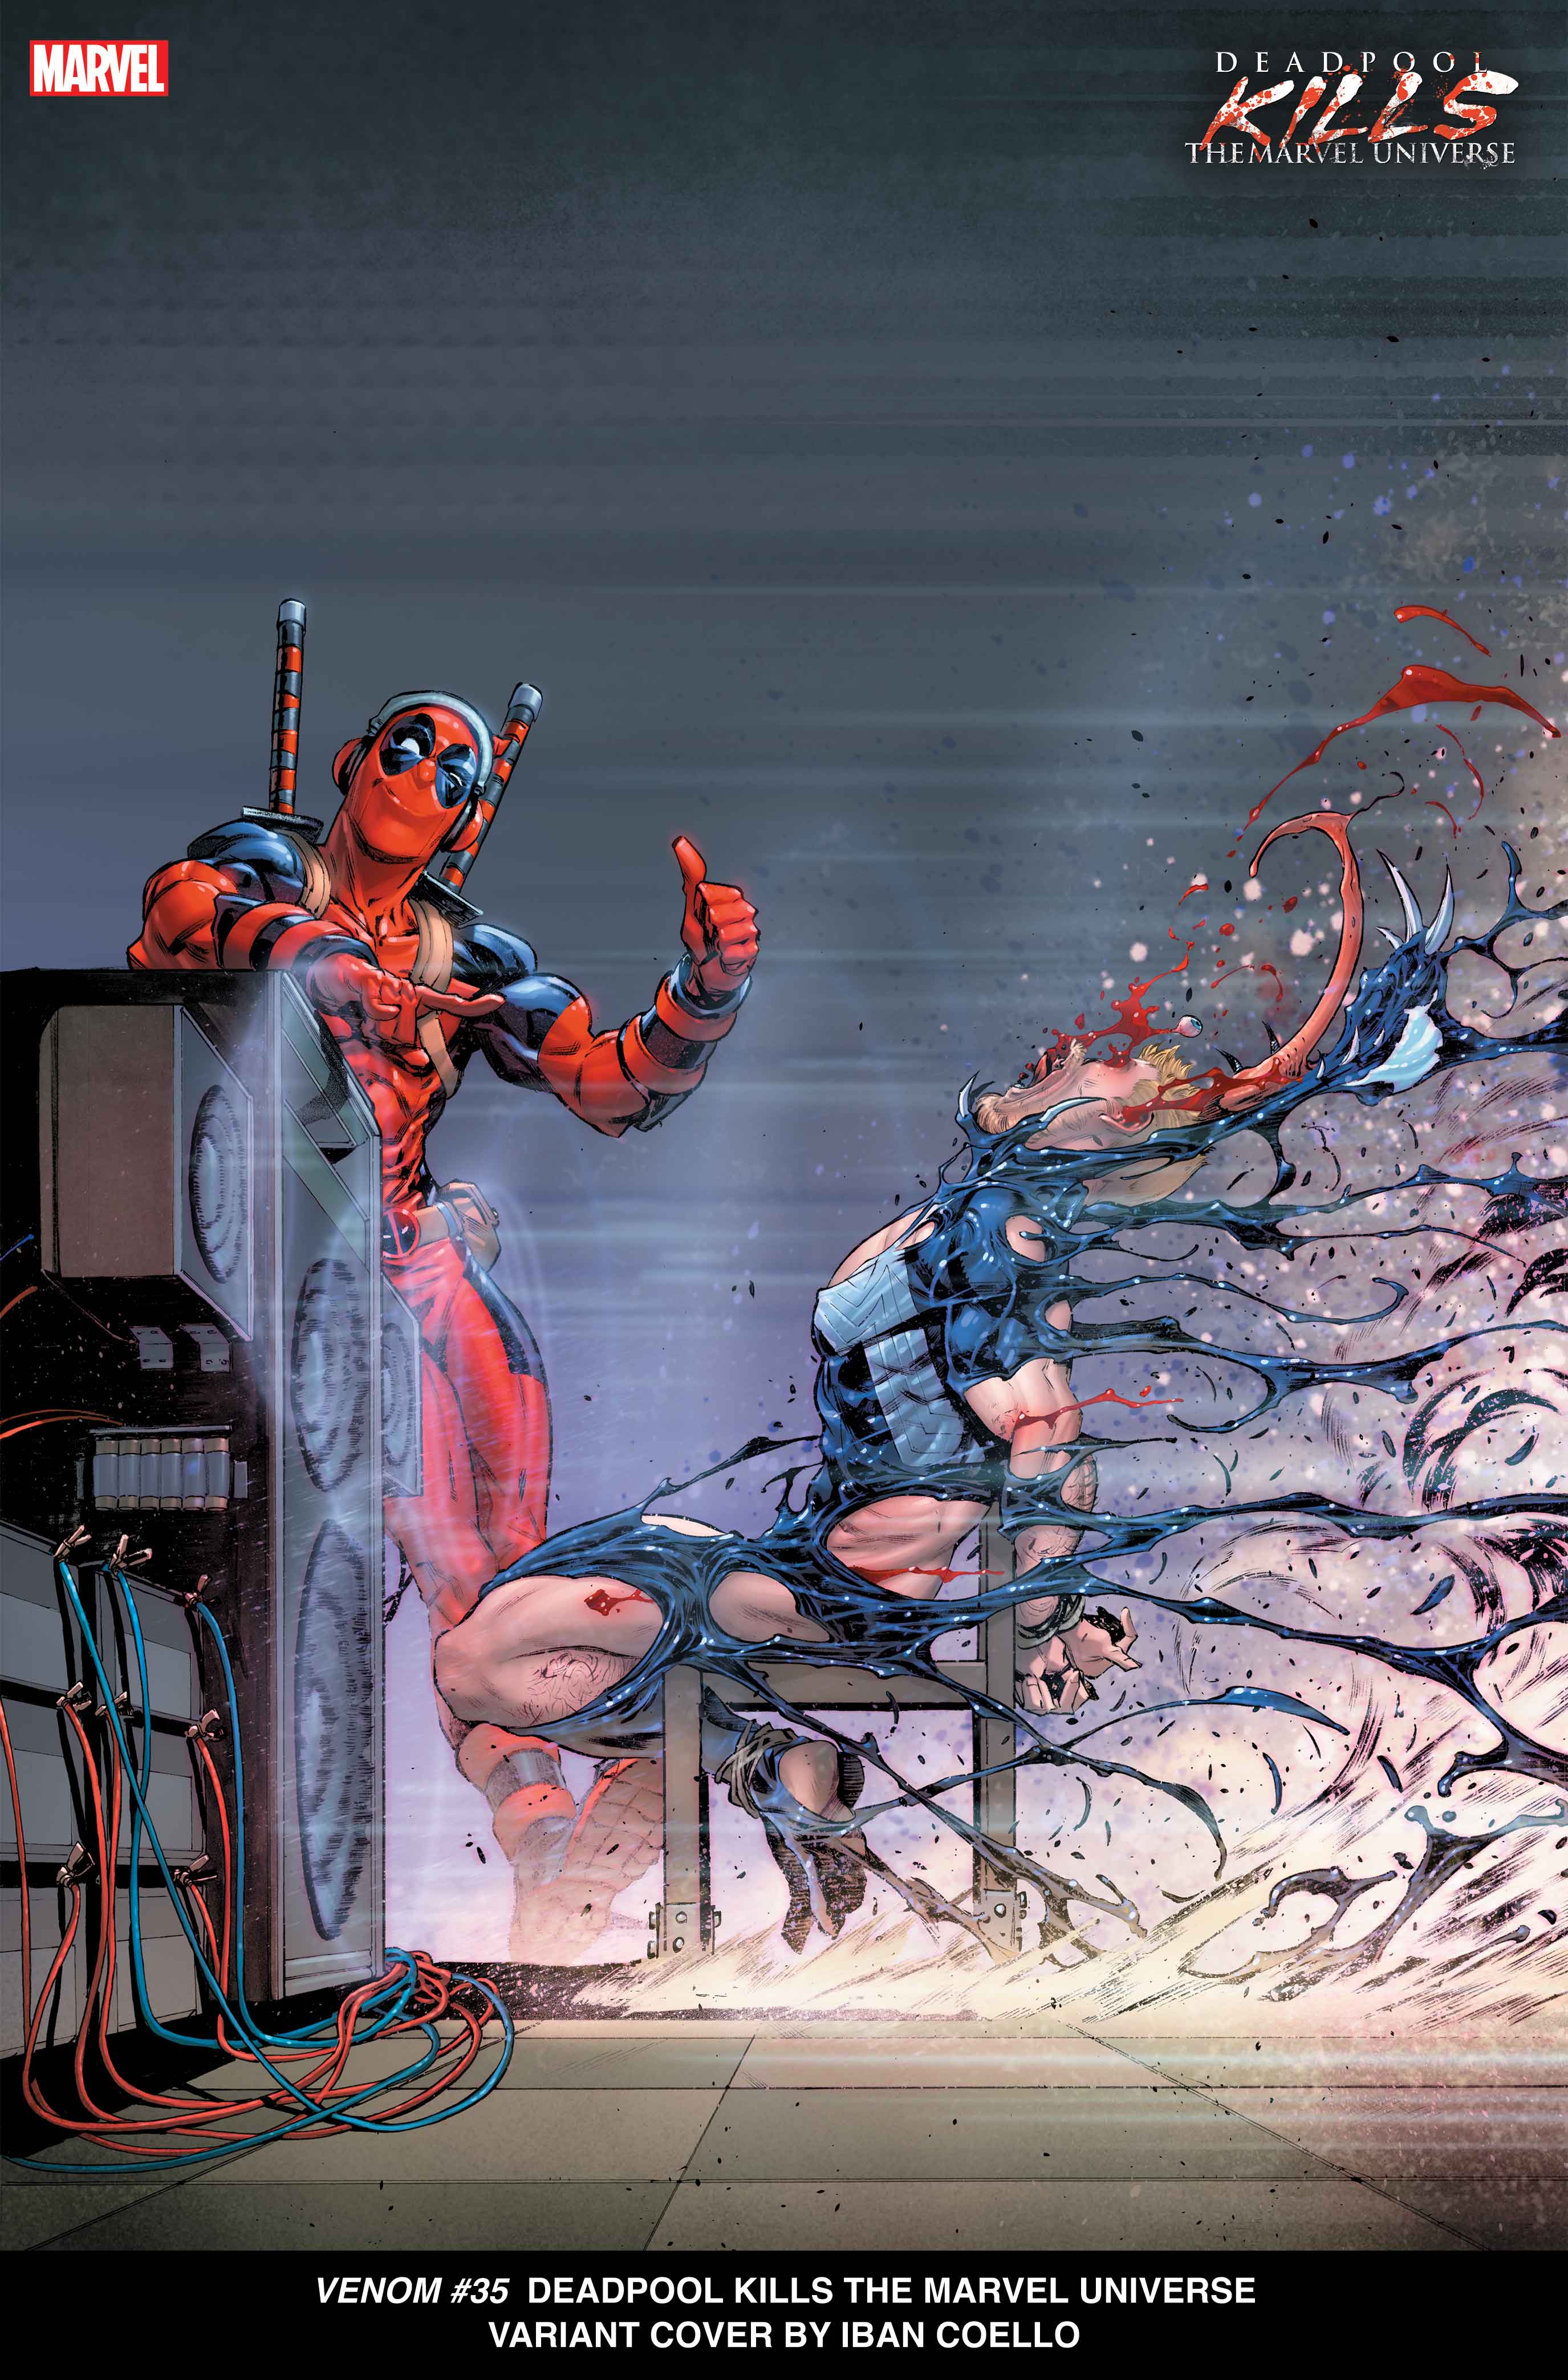 deadpool blasts eddie brock with sound, his suit falling apart as brock's tied to a chair.